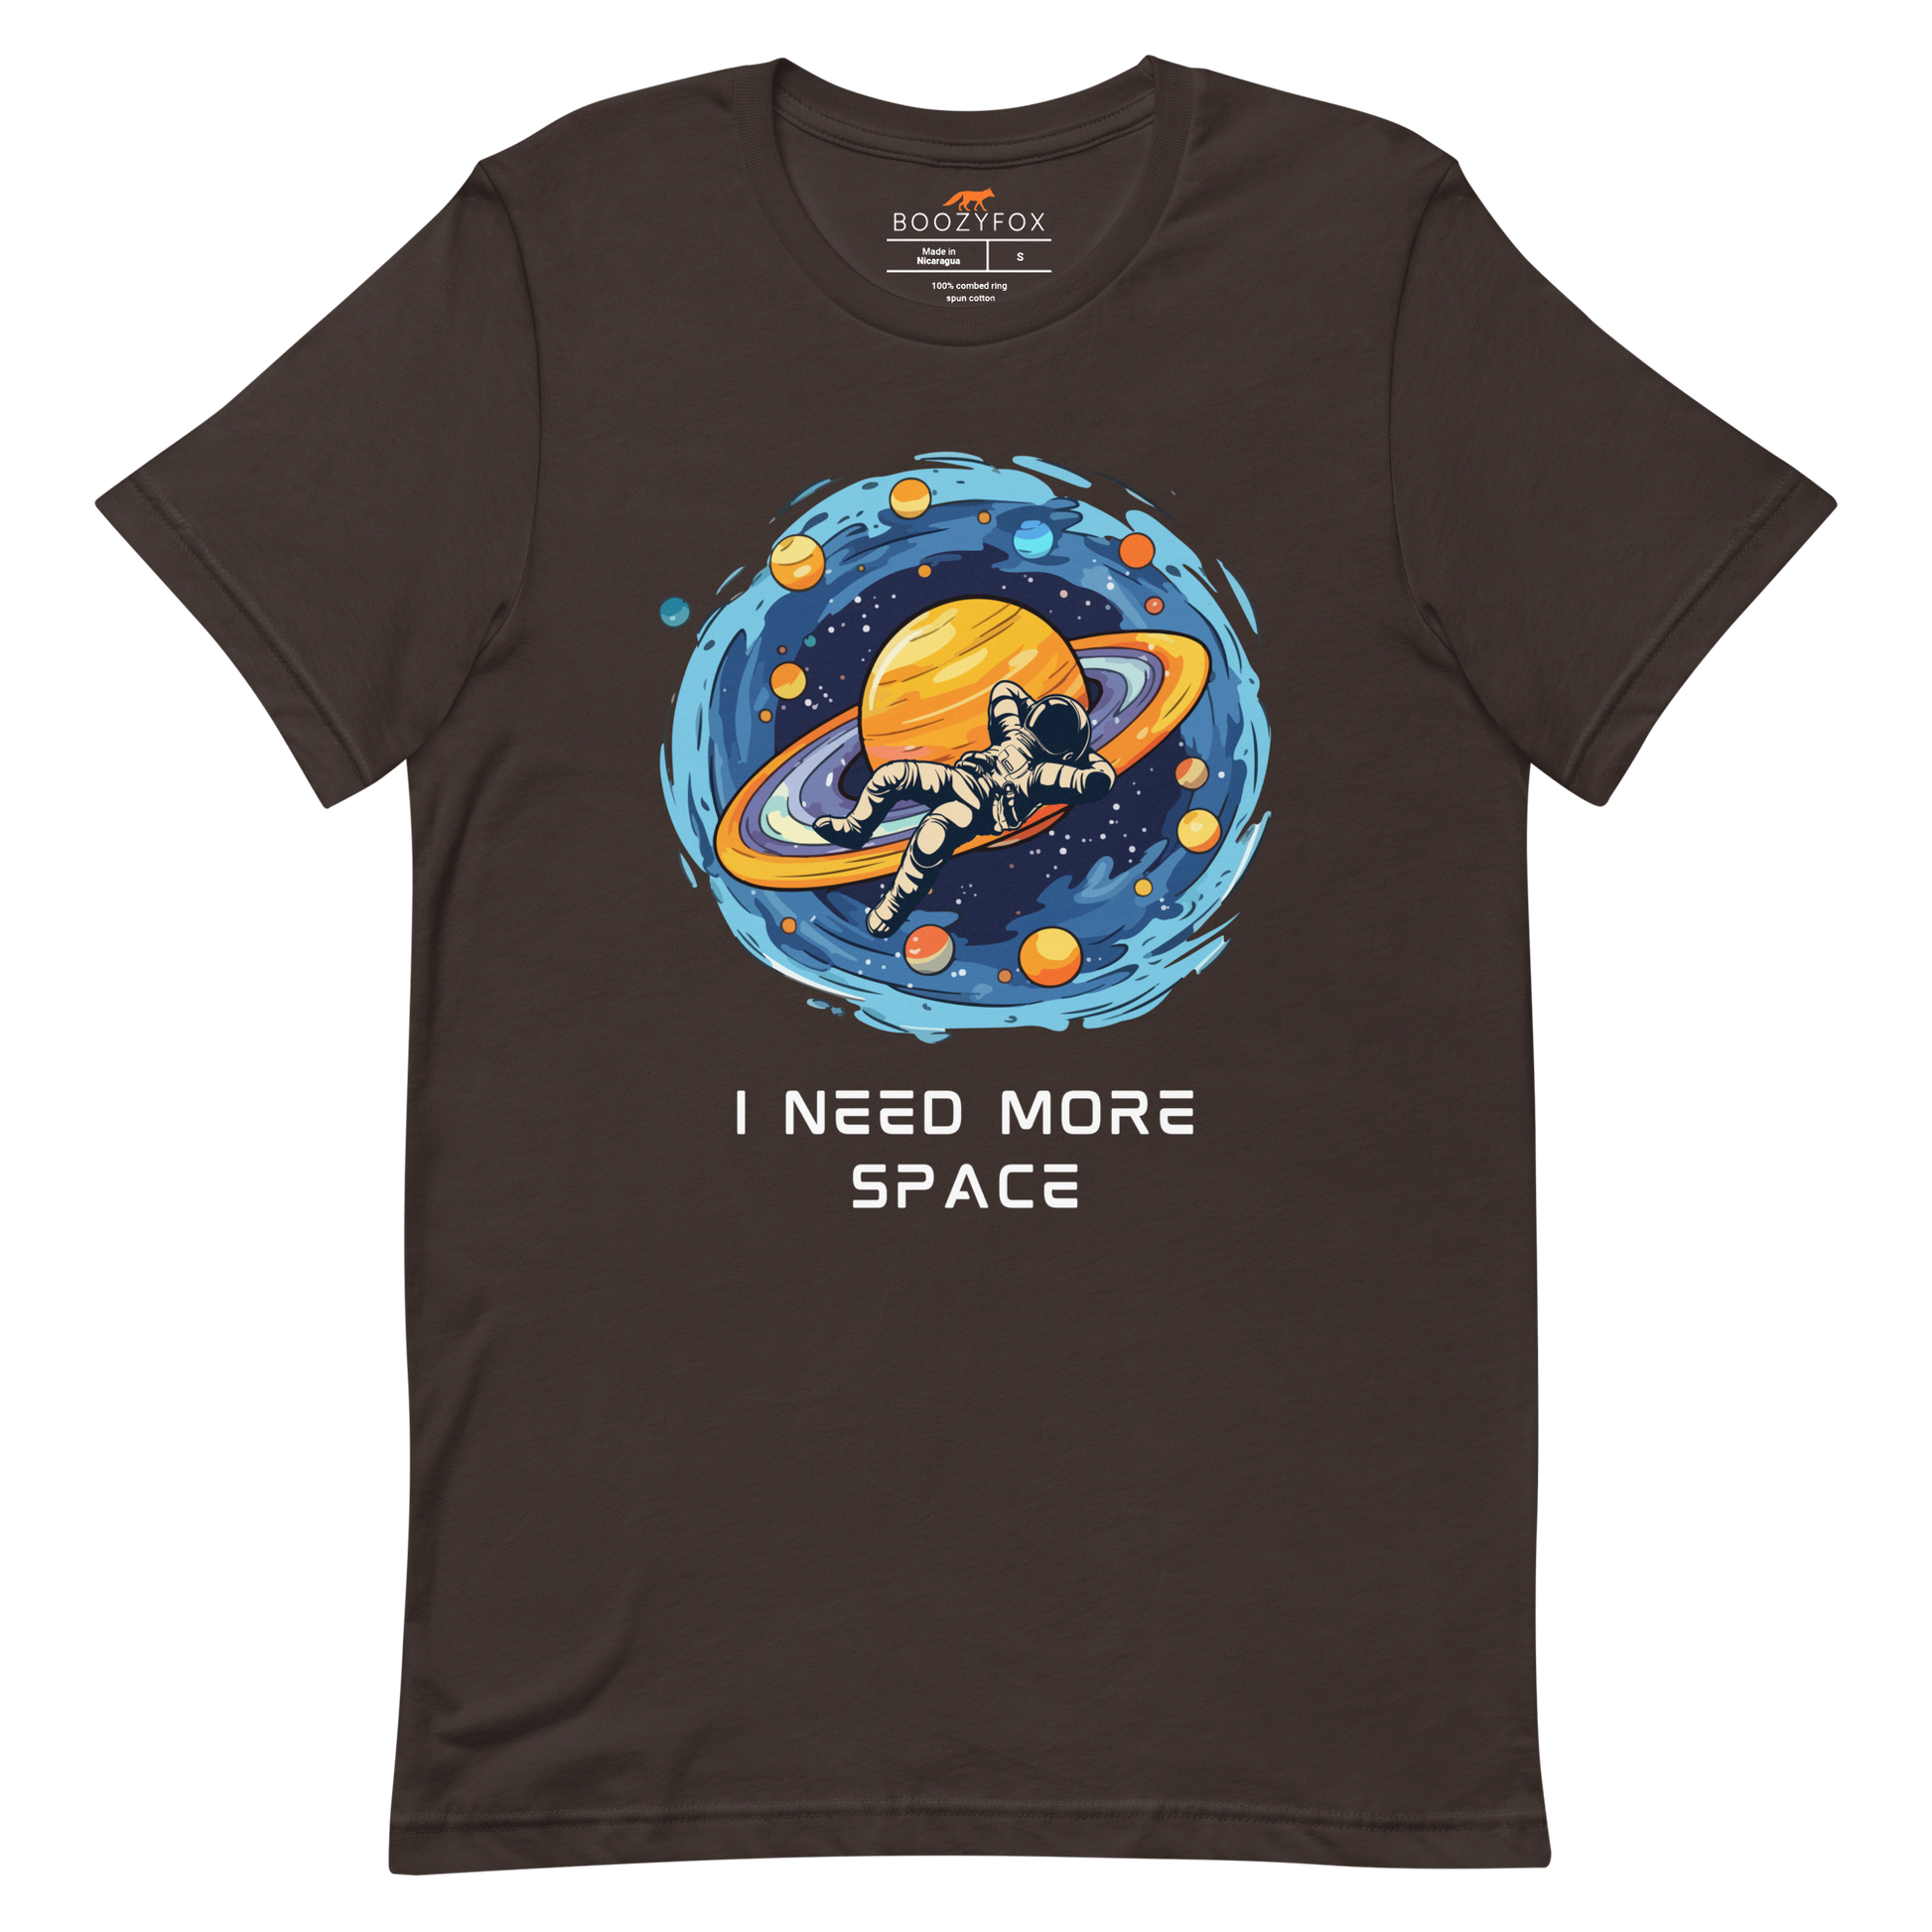 Brown Premium Astronaut Tee featuring a captivating I Need More Space graphic on the chest - Funny Graphic Space Tees - Boozy Fox